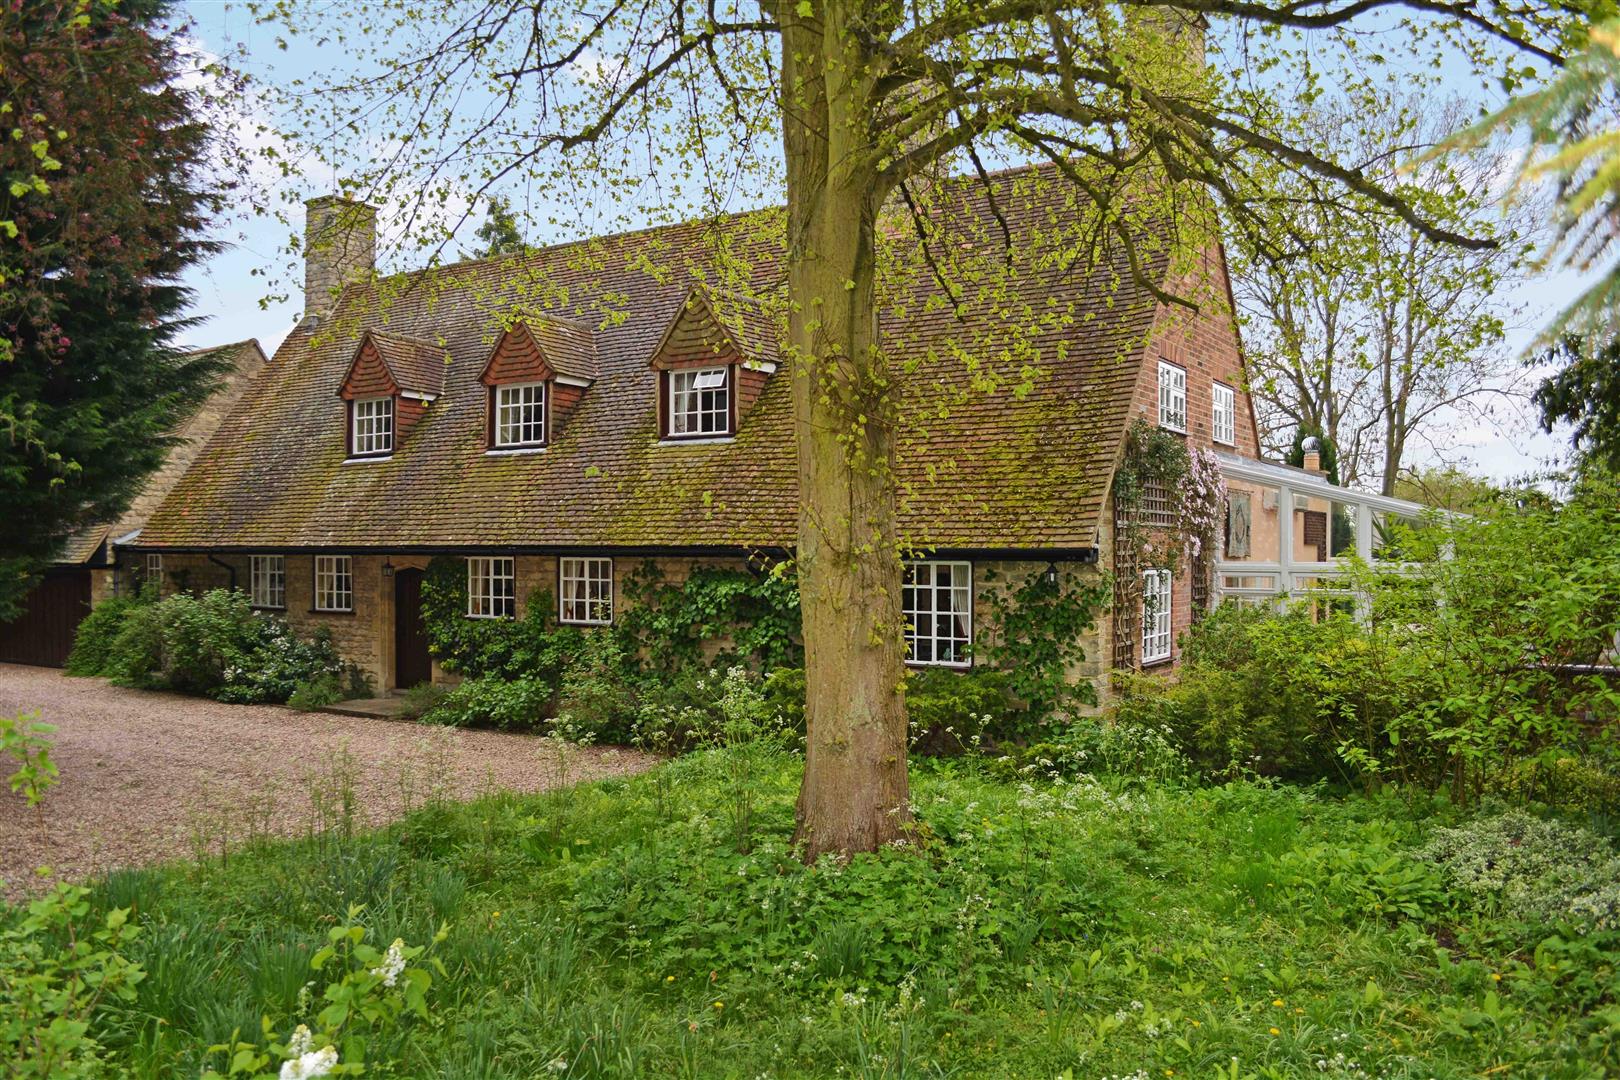 6 Bedroom Country House For Sale in Fringford, Oxfordshire